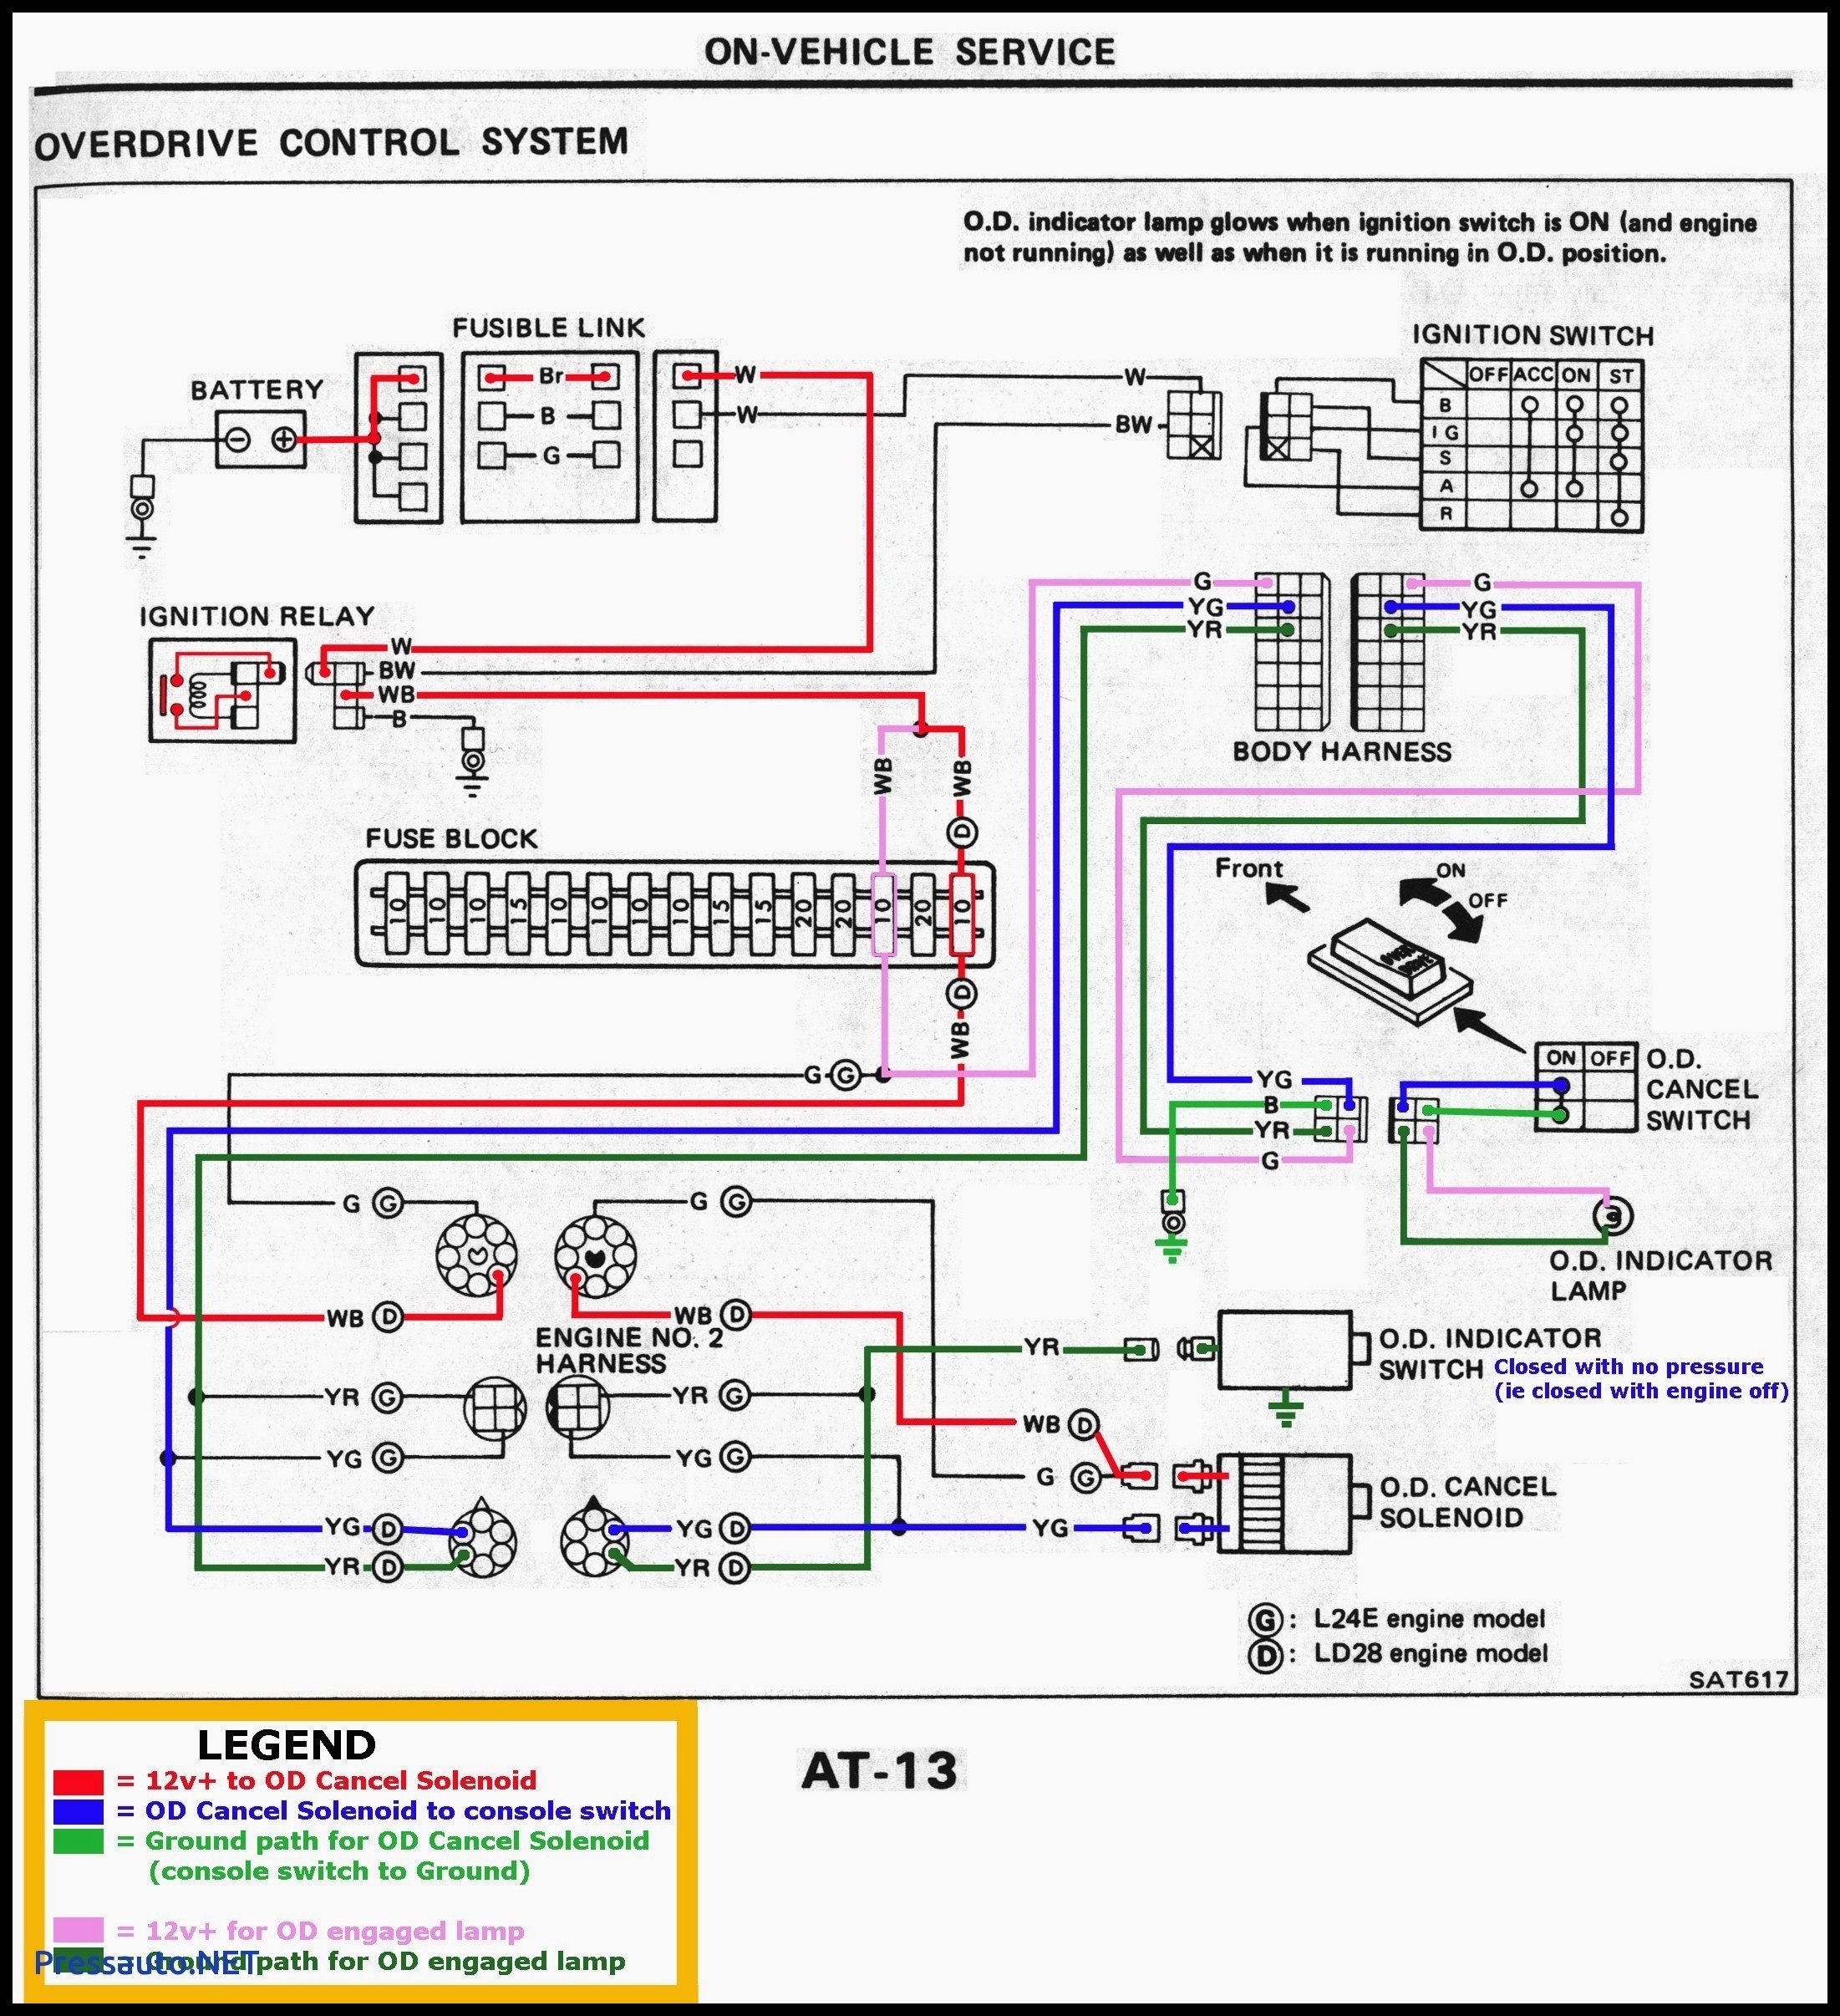 Truck Wiring Diagram Symbols Top Rated Toyota Wiring Diagram Symbols Toyota Truck Alternator Toyota Truck Wiring Harness